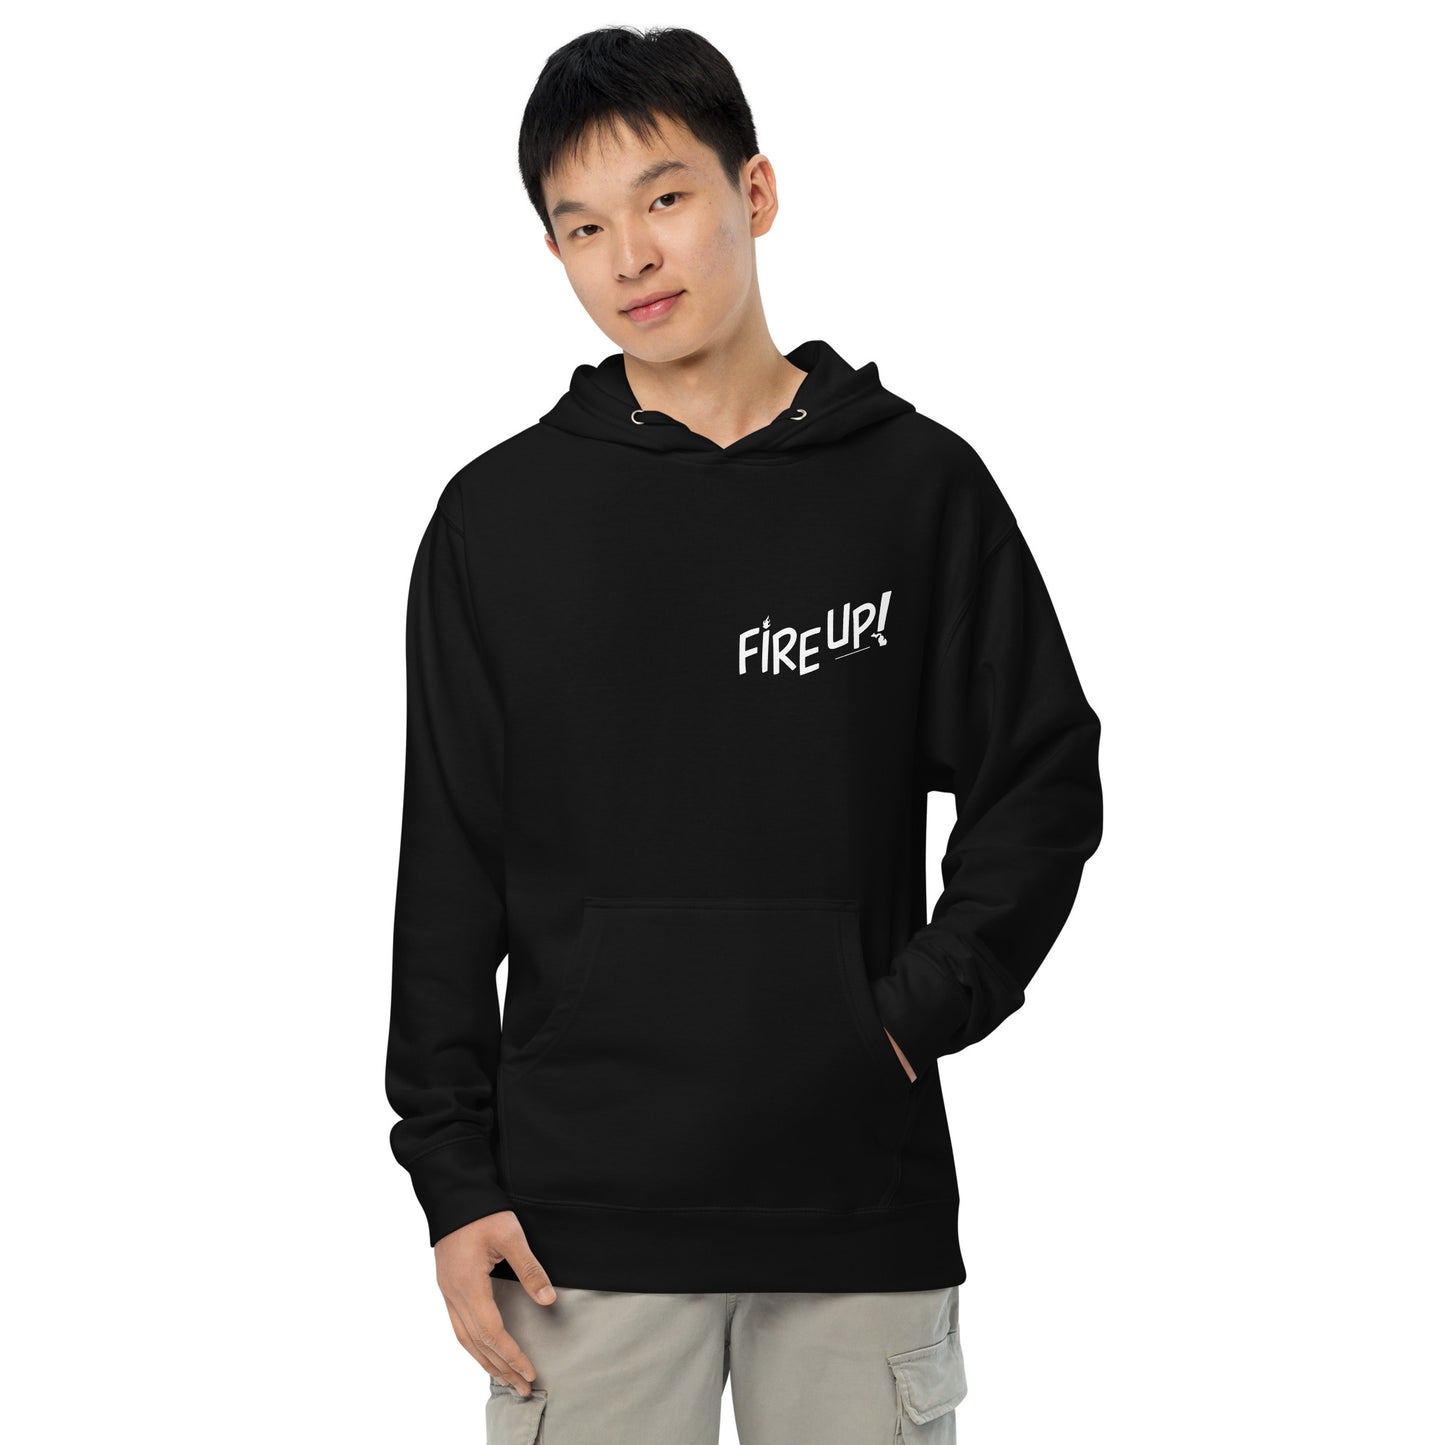 Fire Up! Pocket Unisex midweight hoodie